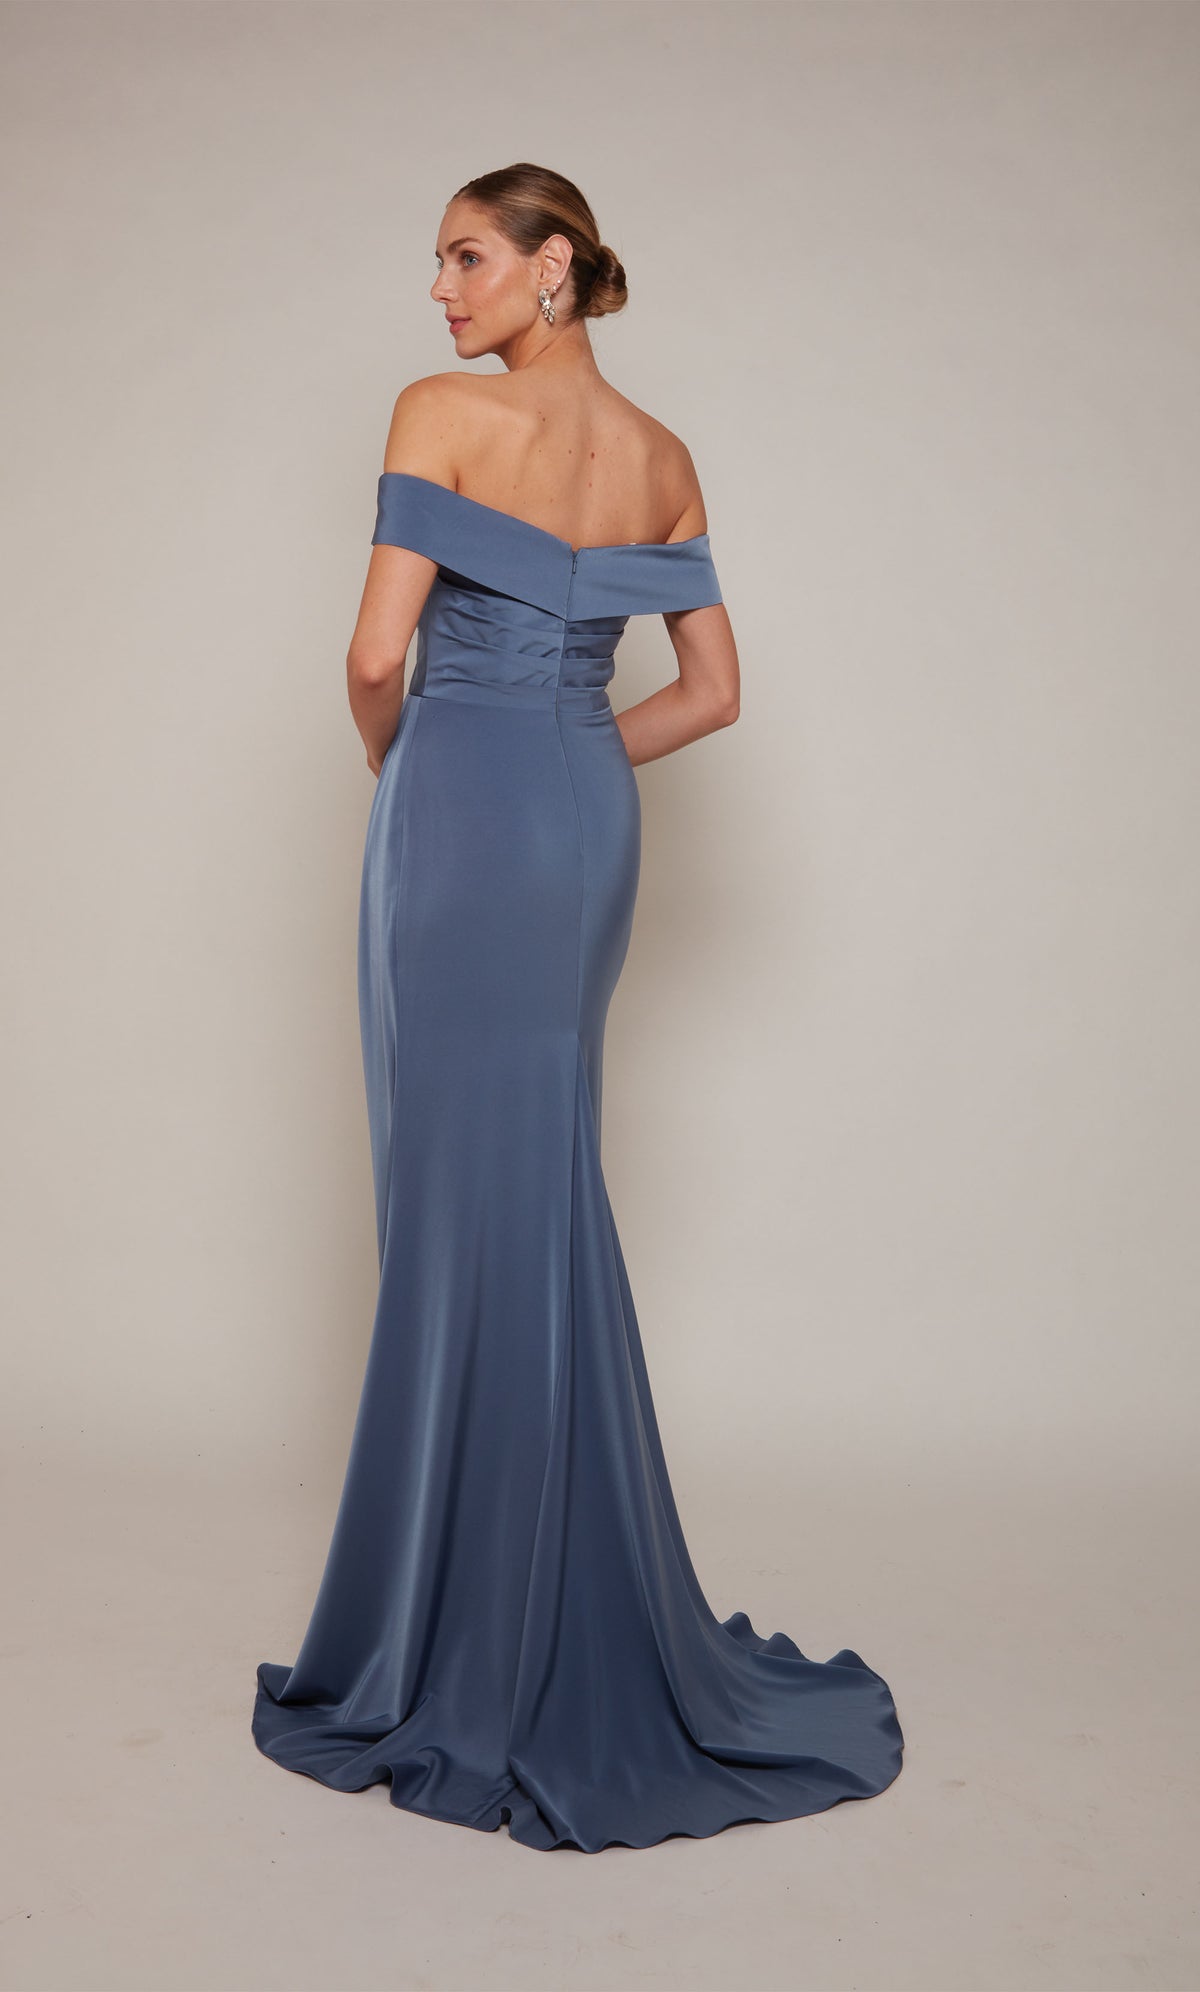 A sophisticated, off-the-shoulder wedding guest dress with a pleated waist and fit and flare silhouette in dark french blue.